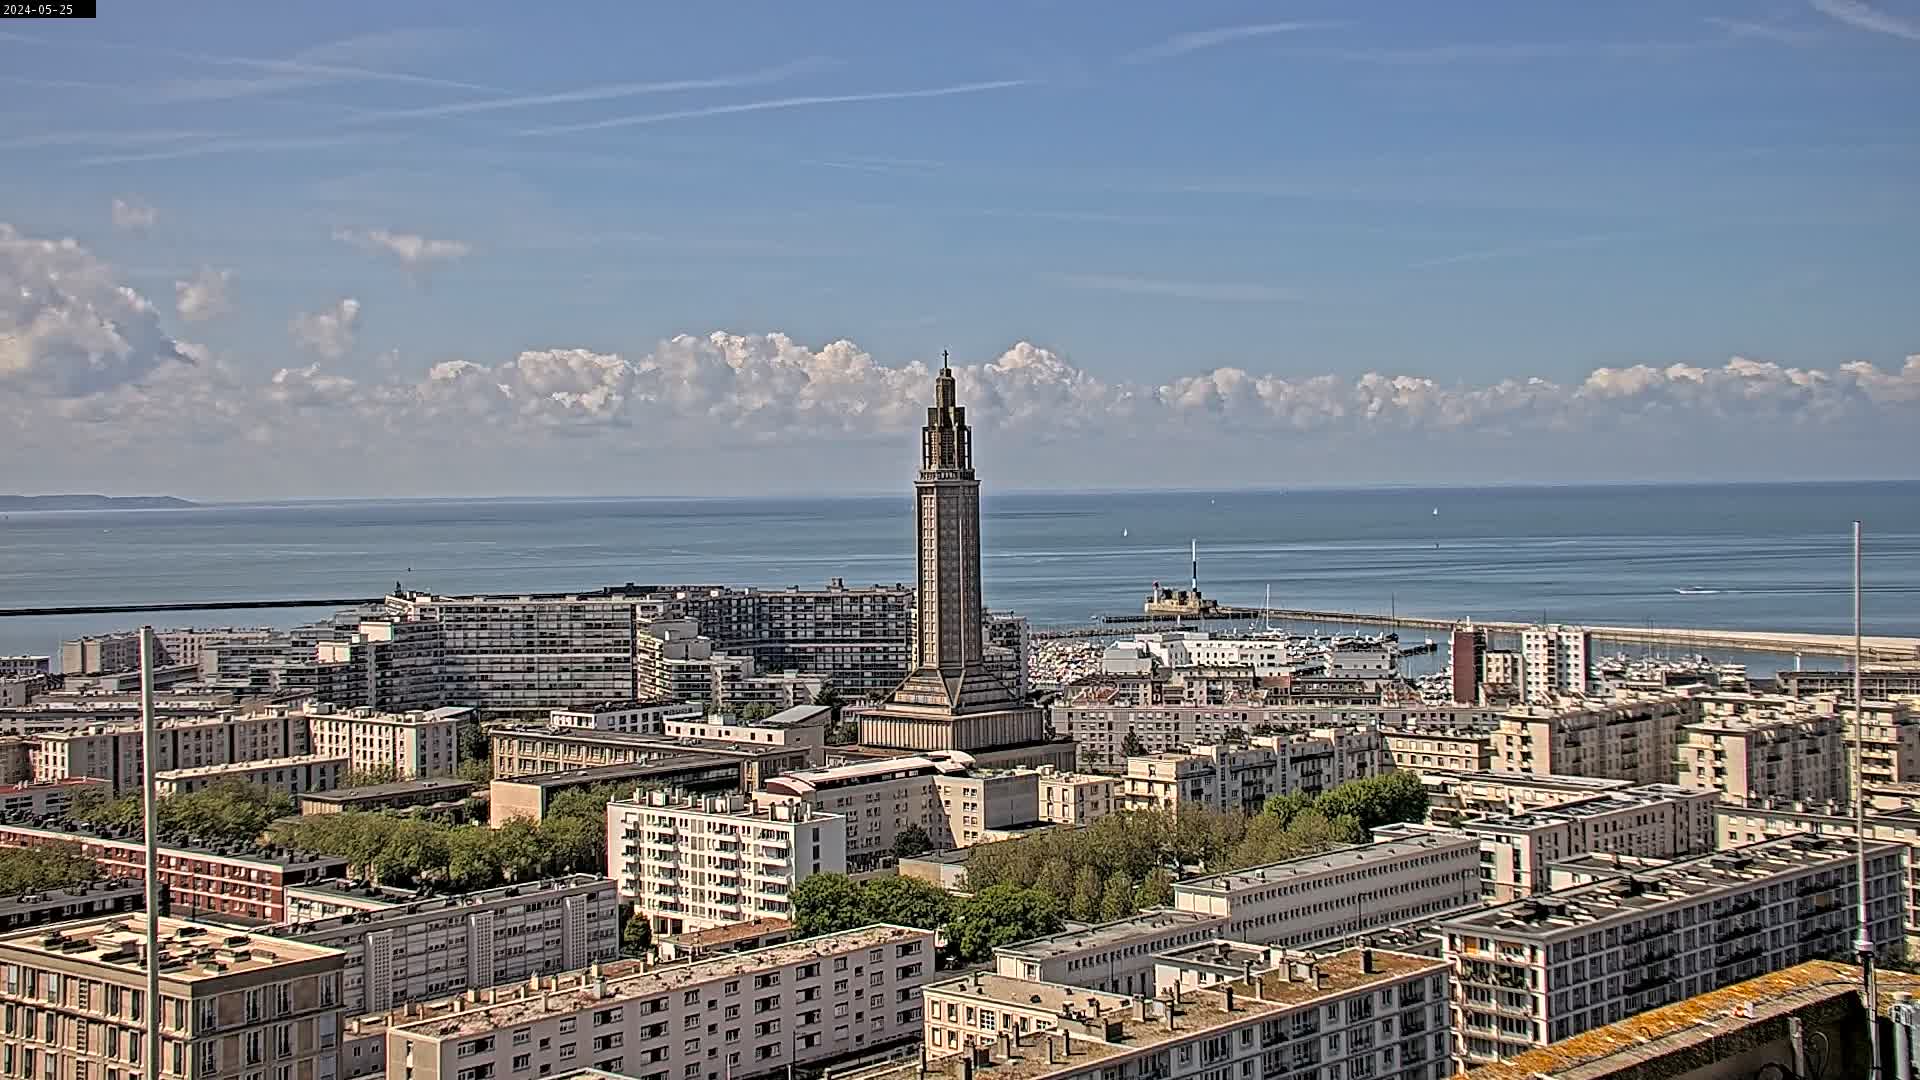 Le Havre Gio. 12:10